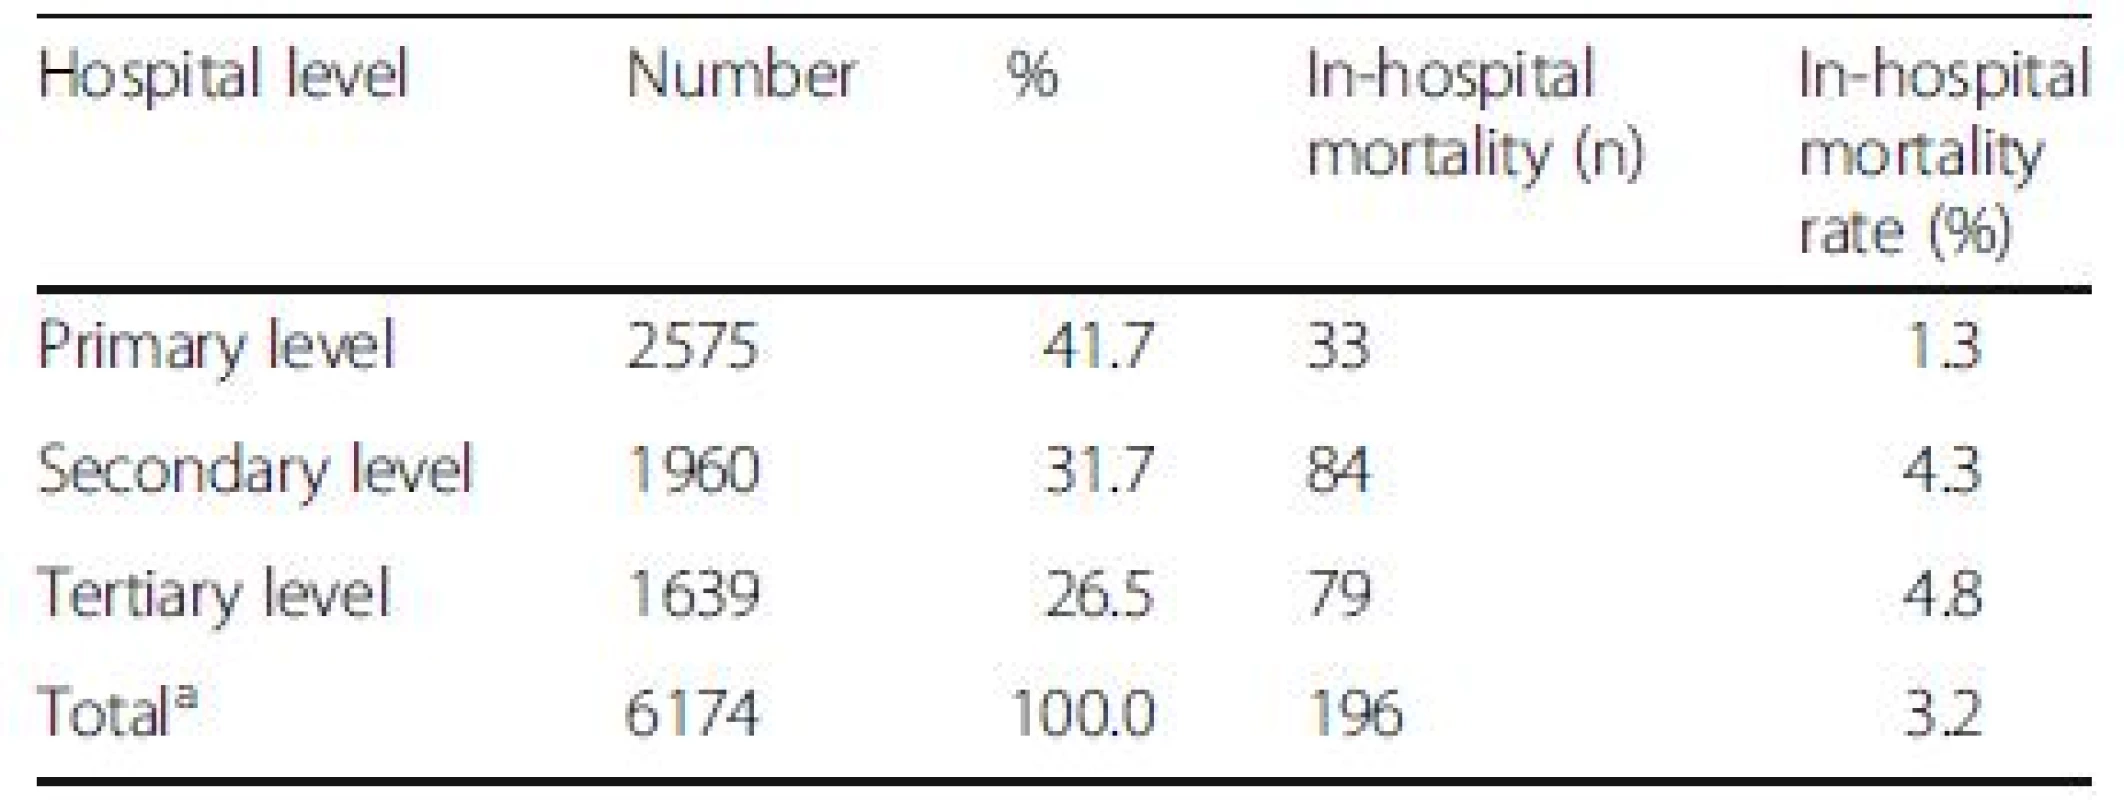 The number (%) of patients with drug-induced liver injury (DILI) and in-hospital mortality according to hospital levels